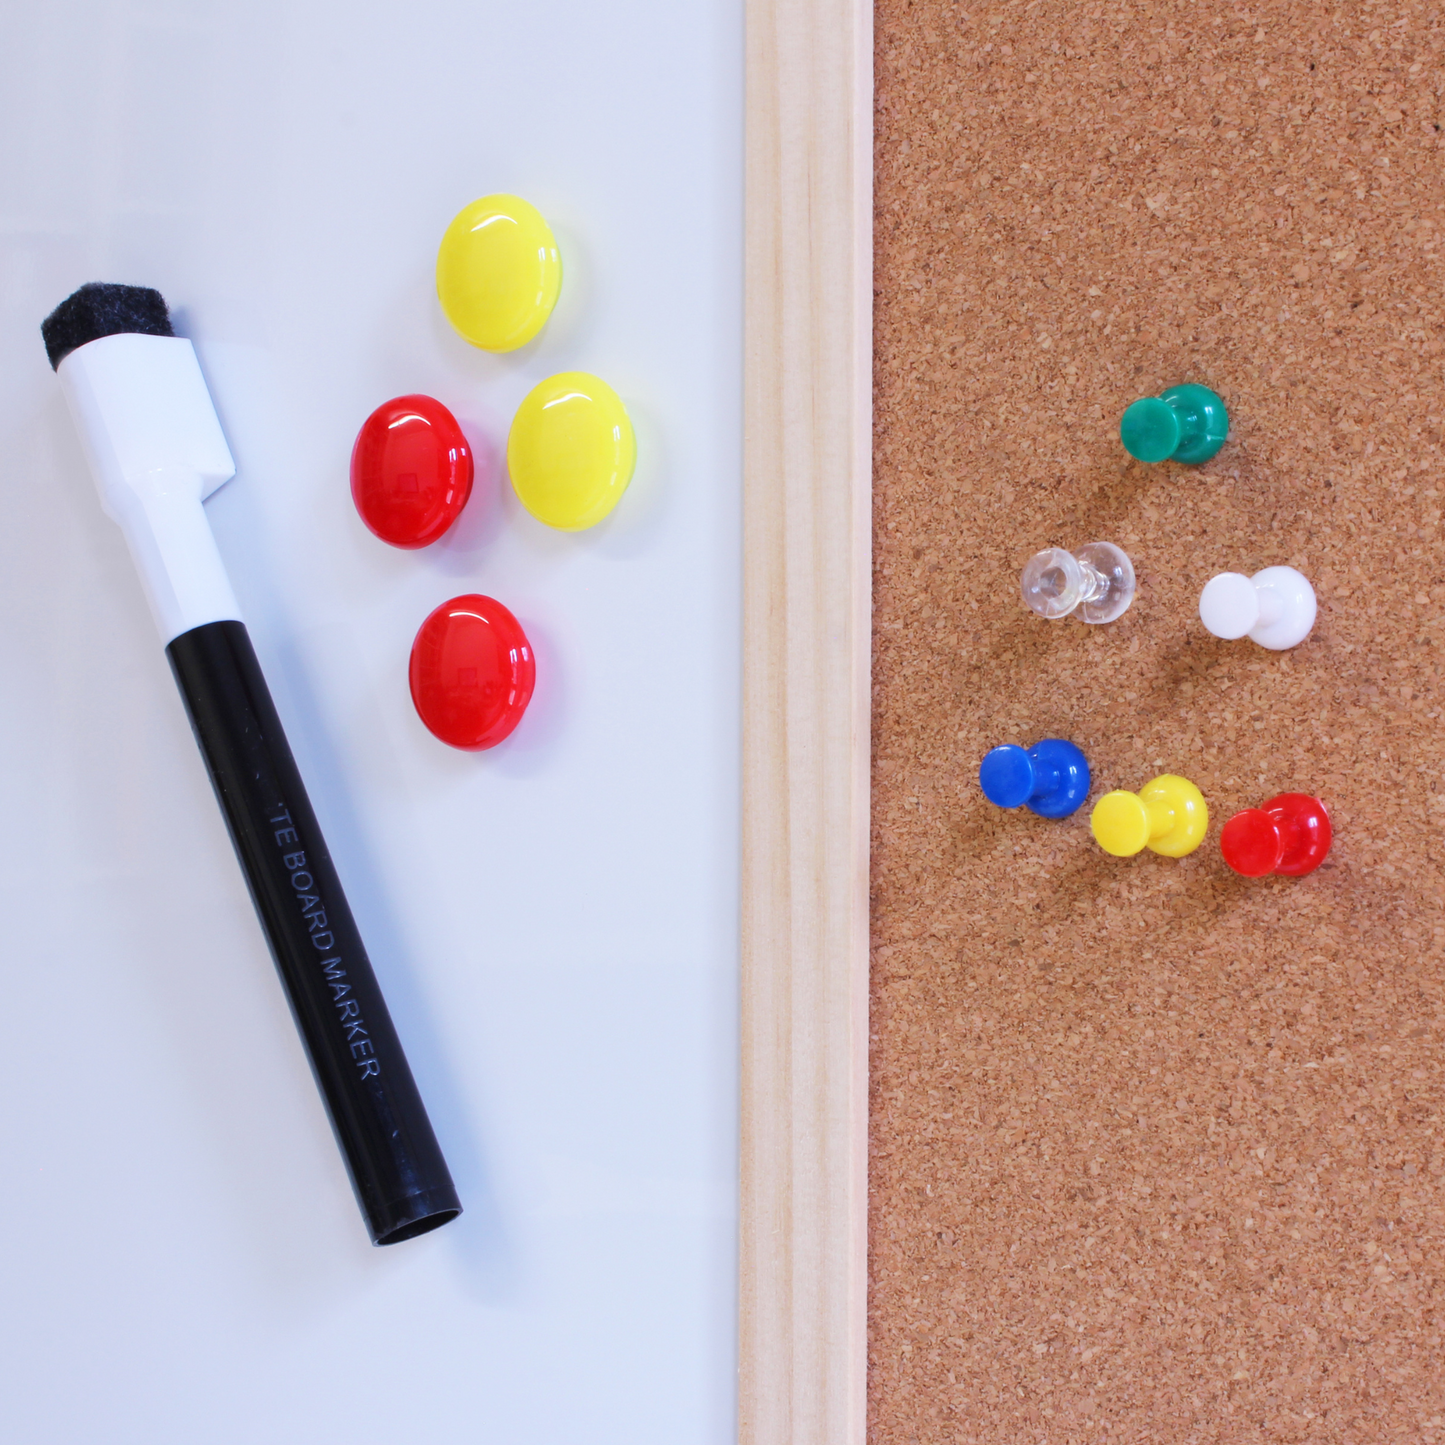 Close-up of a 60x80cm dry erase and cork combination noticeboard, featuring a whiteboard marker and colorful magnets on the white side, with assorted transparent and colored pushpins on the cork side, all framed in natural wood.